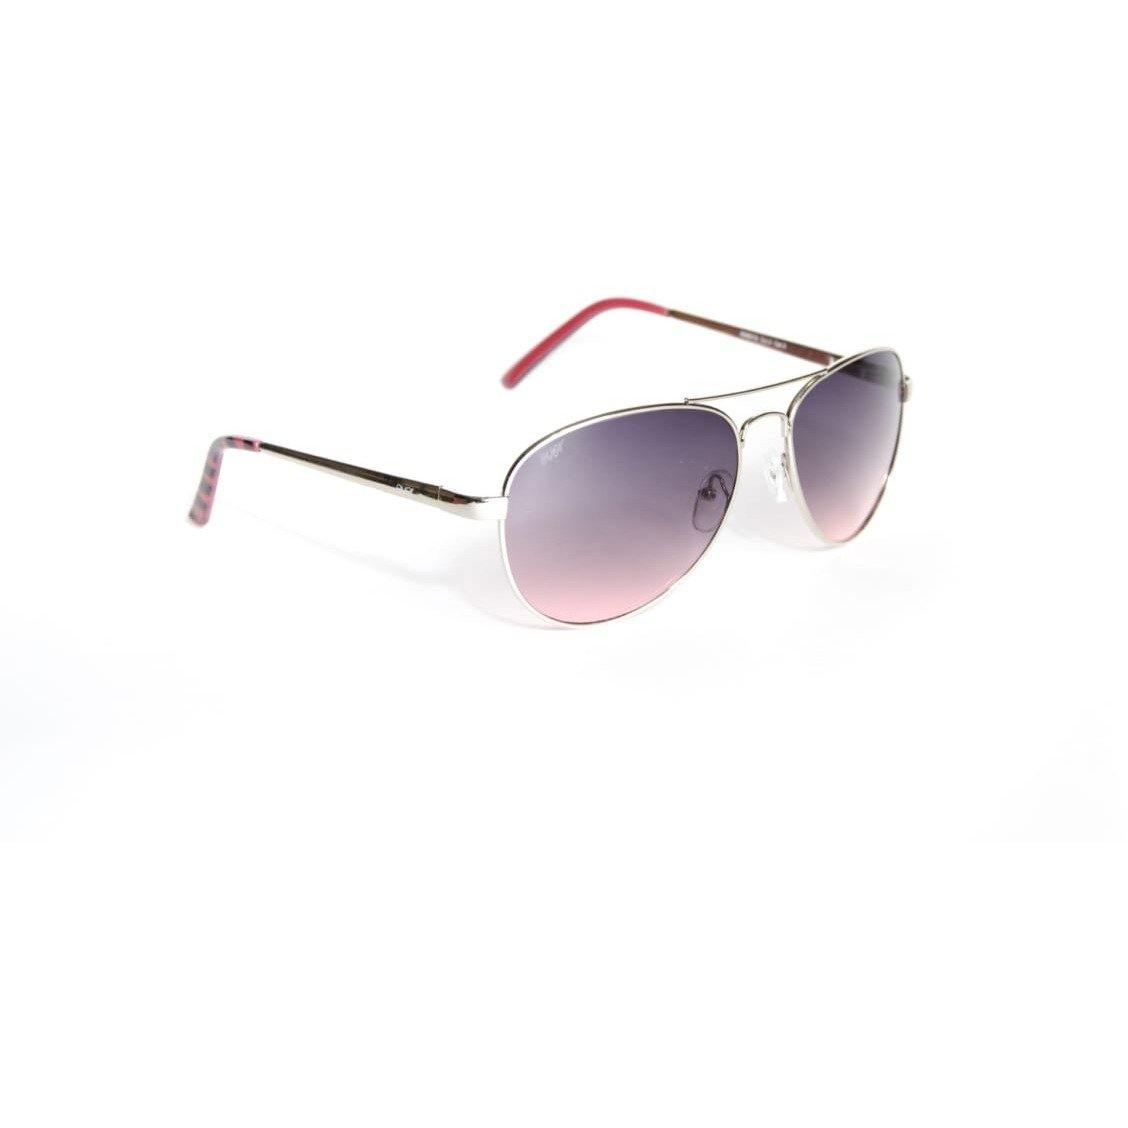 The Ever Collection sunglasses model 